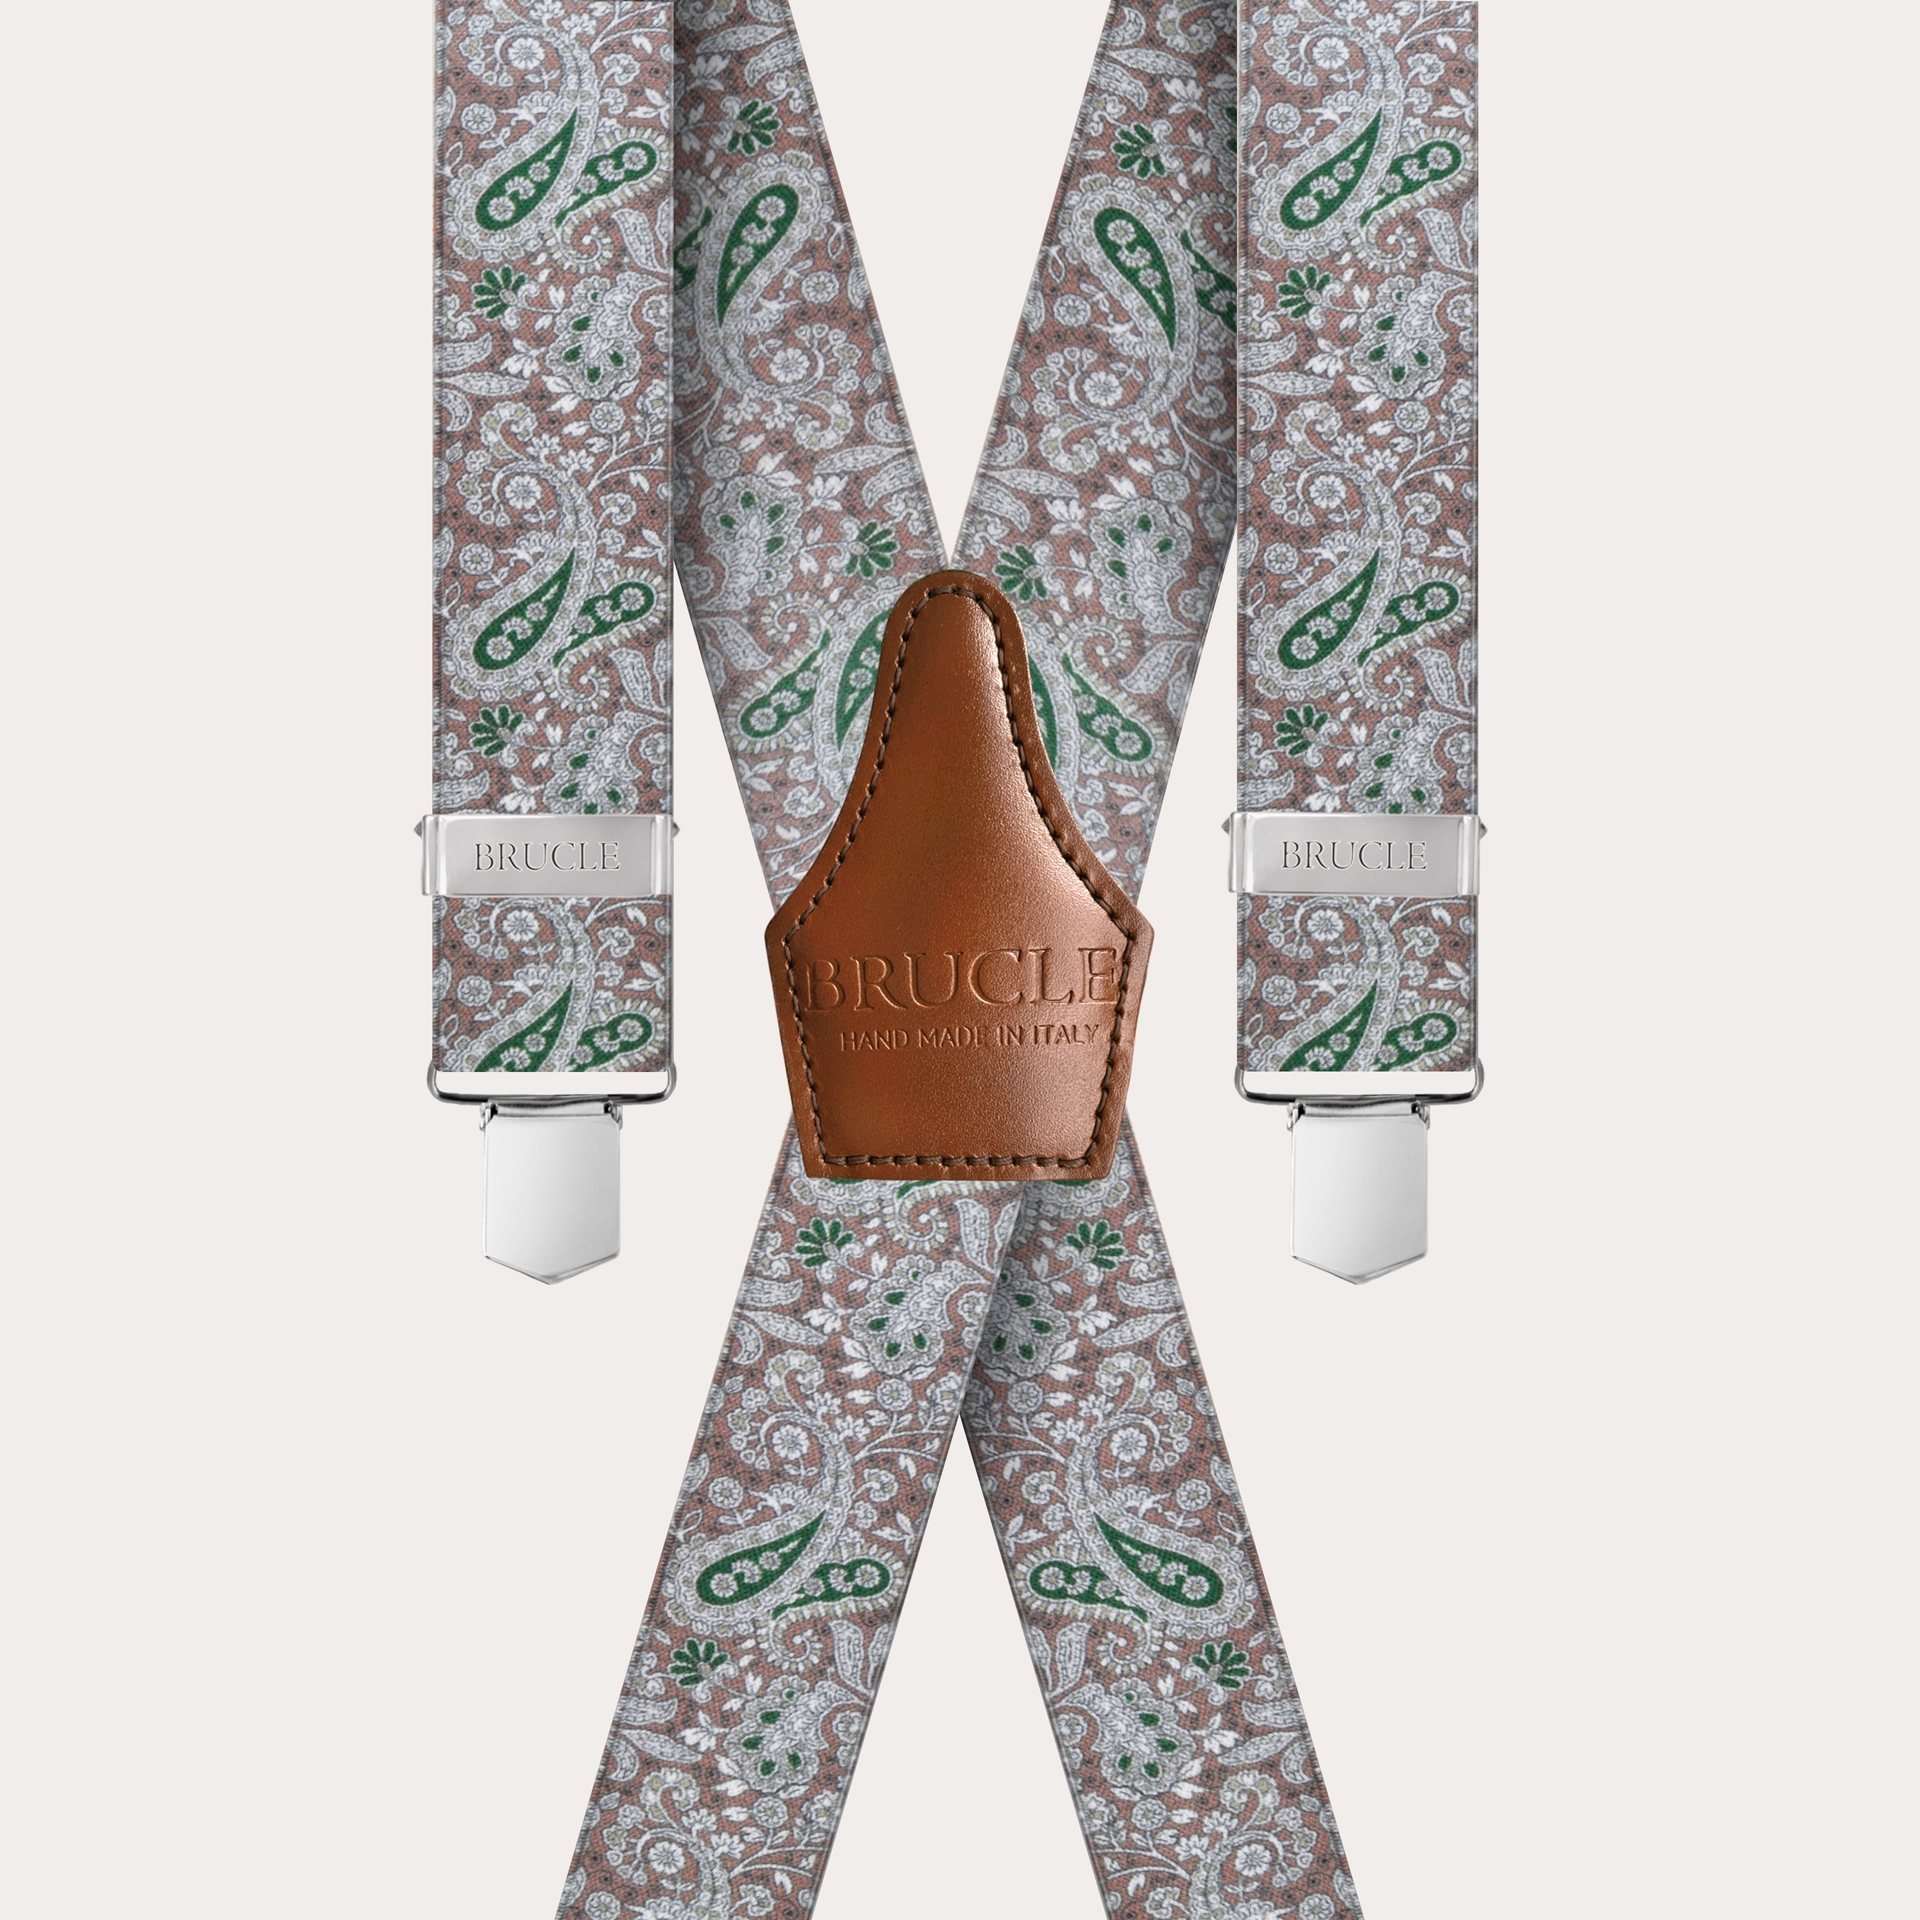 BRUCLE Unisex X suspenders with satin effect, brown and green cashmere pattern